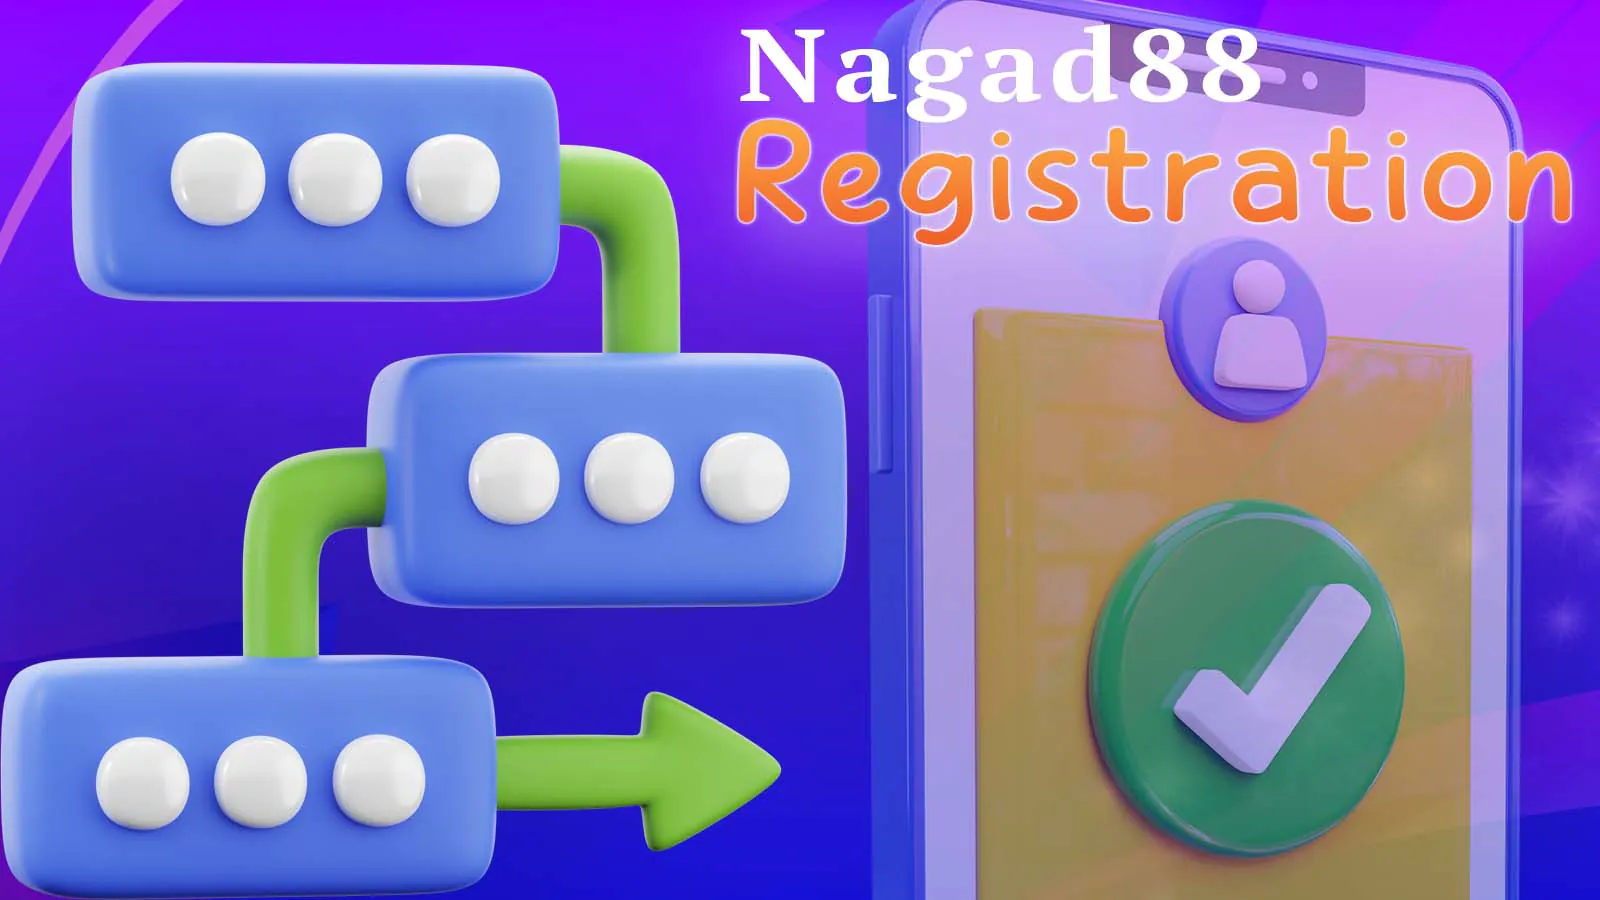 Step-by-Step guide of registration account on the Nagad88